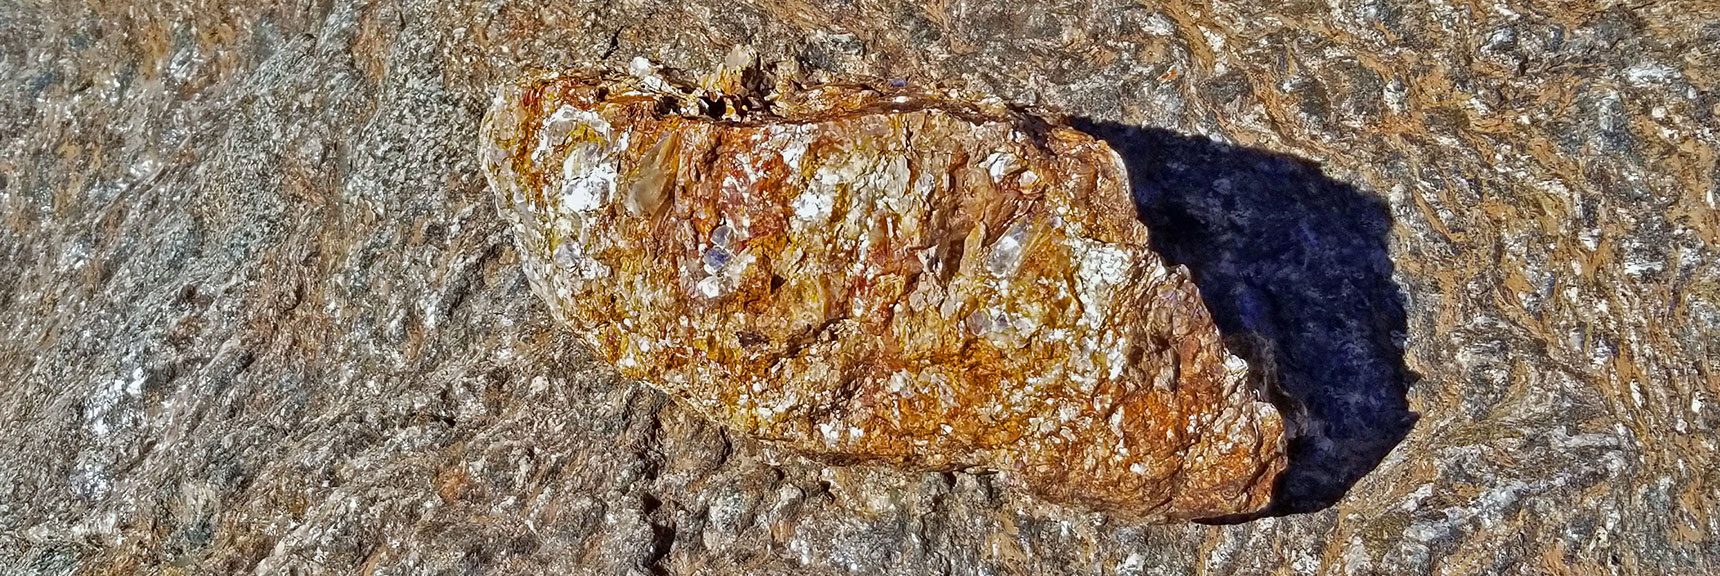 Raw Gold Ore Embedded with Crystal | Keane Wonder Mine | Death Valley National Park, California